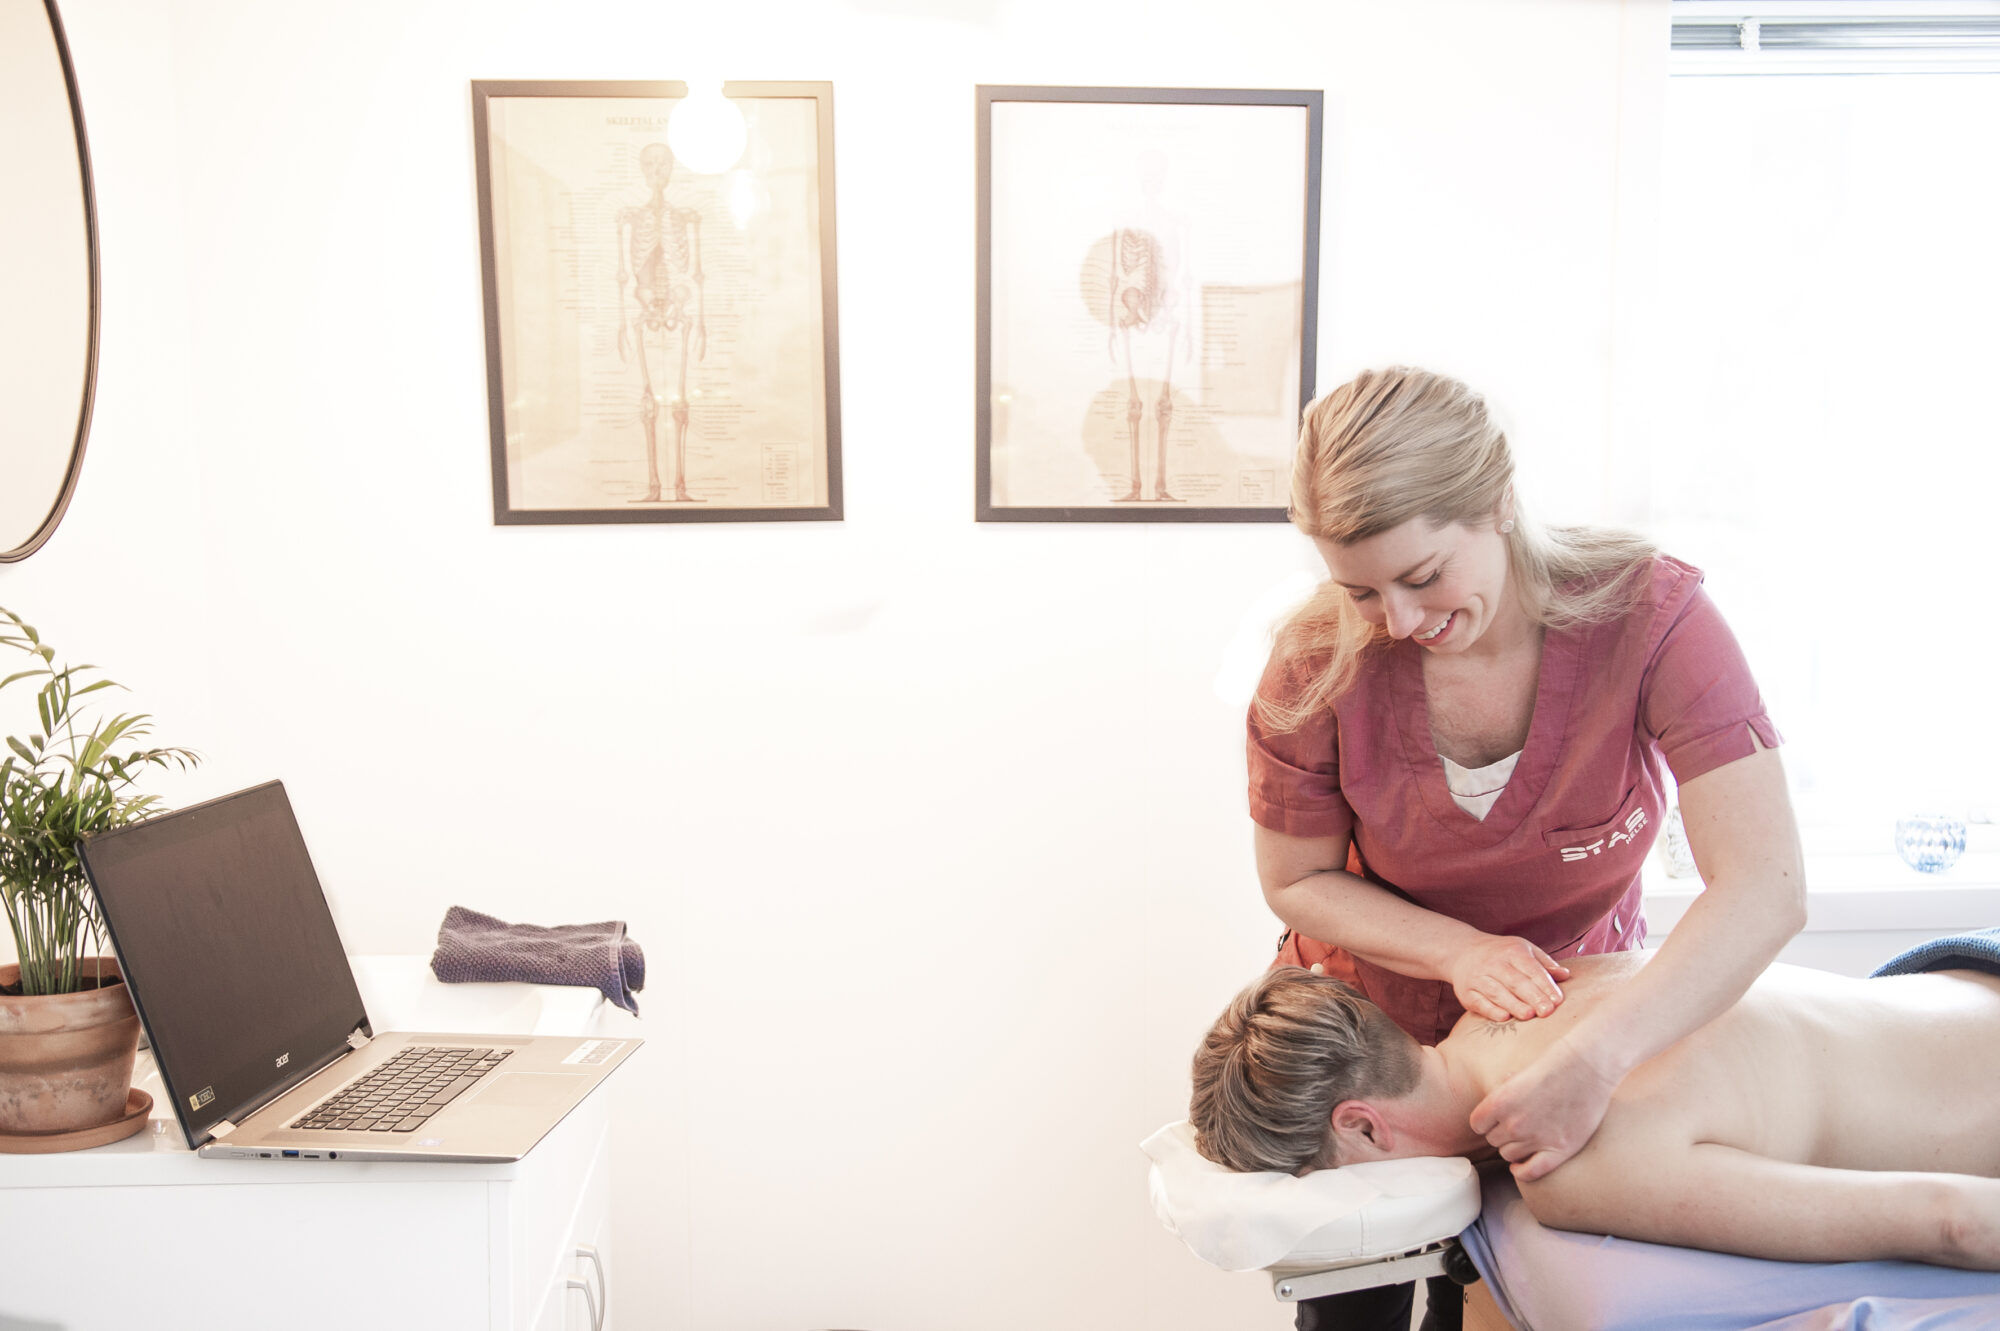 Muscle therapist and clinic owner Veronica Warhaug providing a treatment to a patient